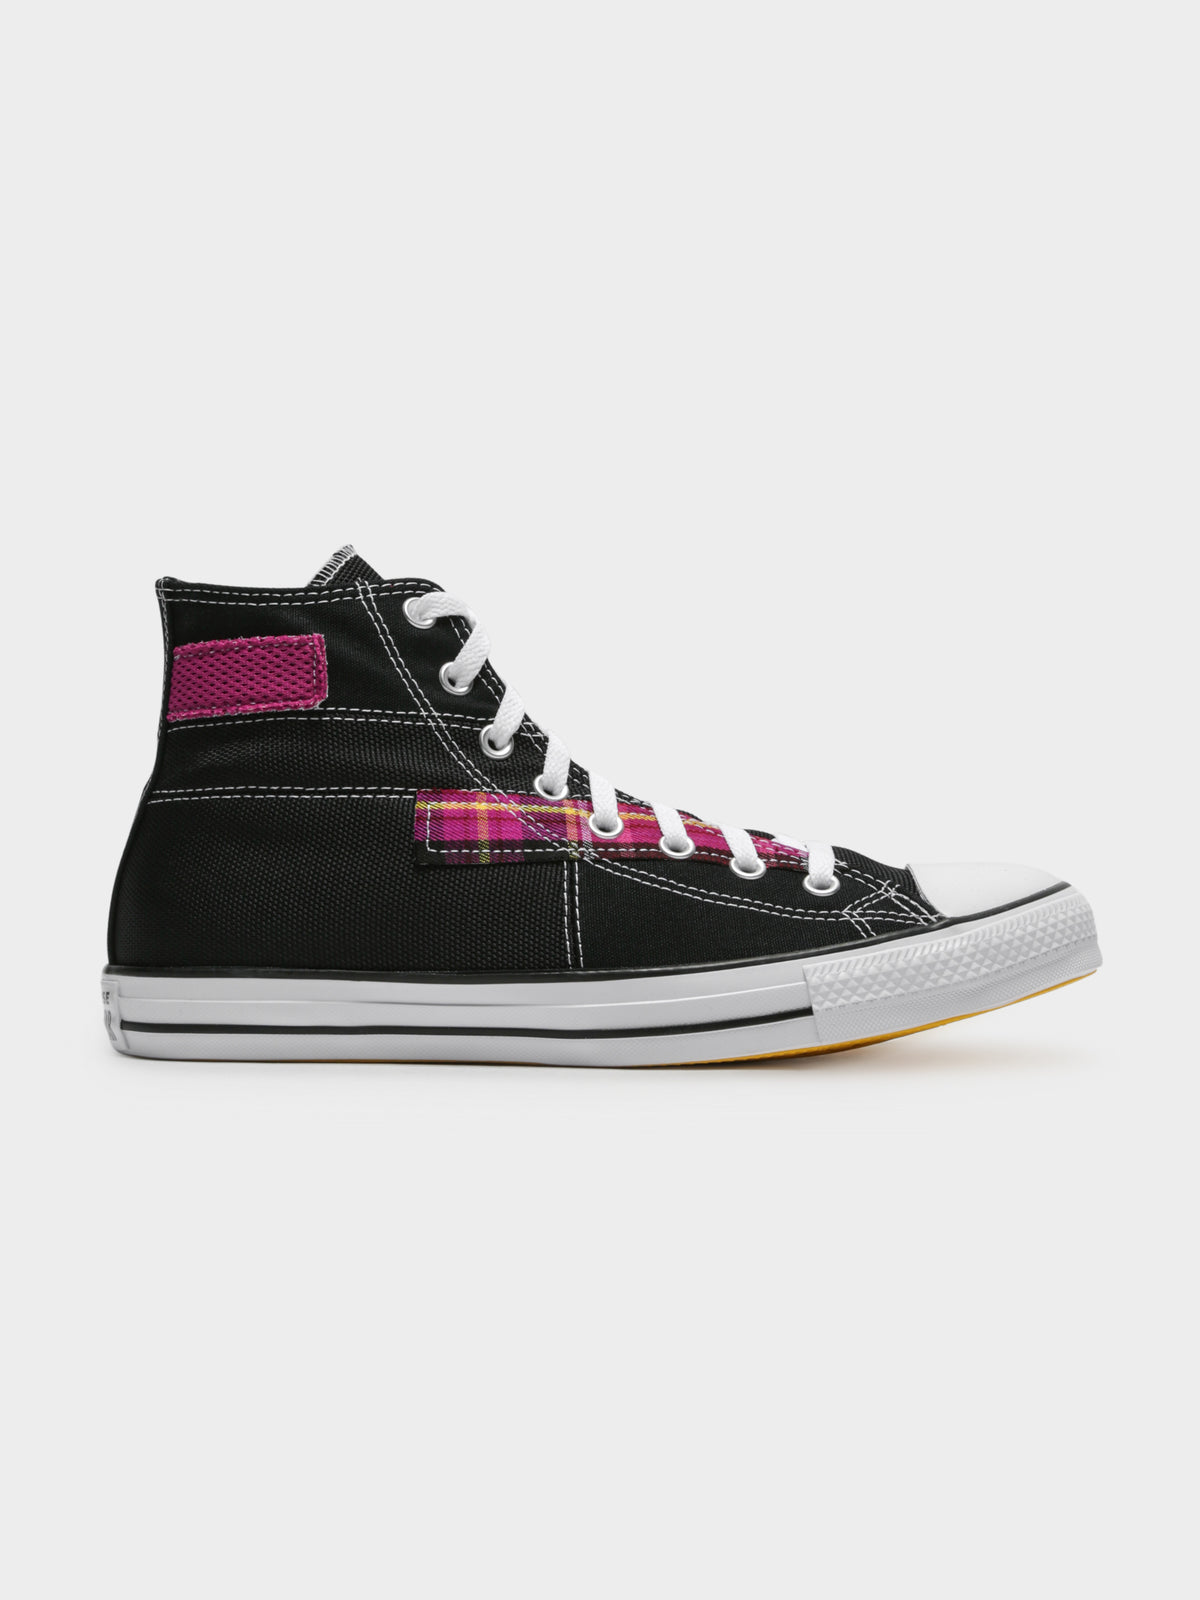 Unisex Converse Chuck Taylor All Star Patchwork High Top Sneakers in Black